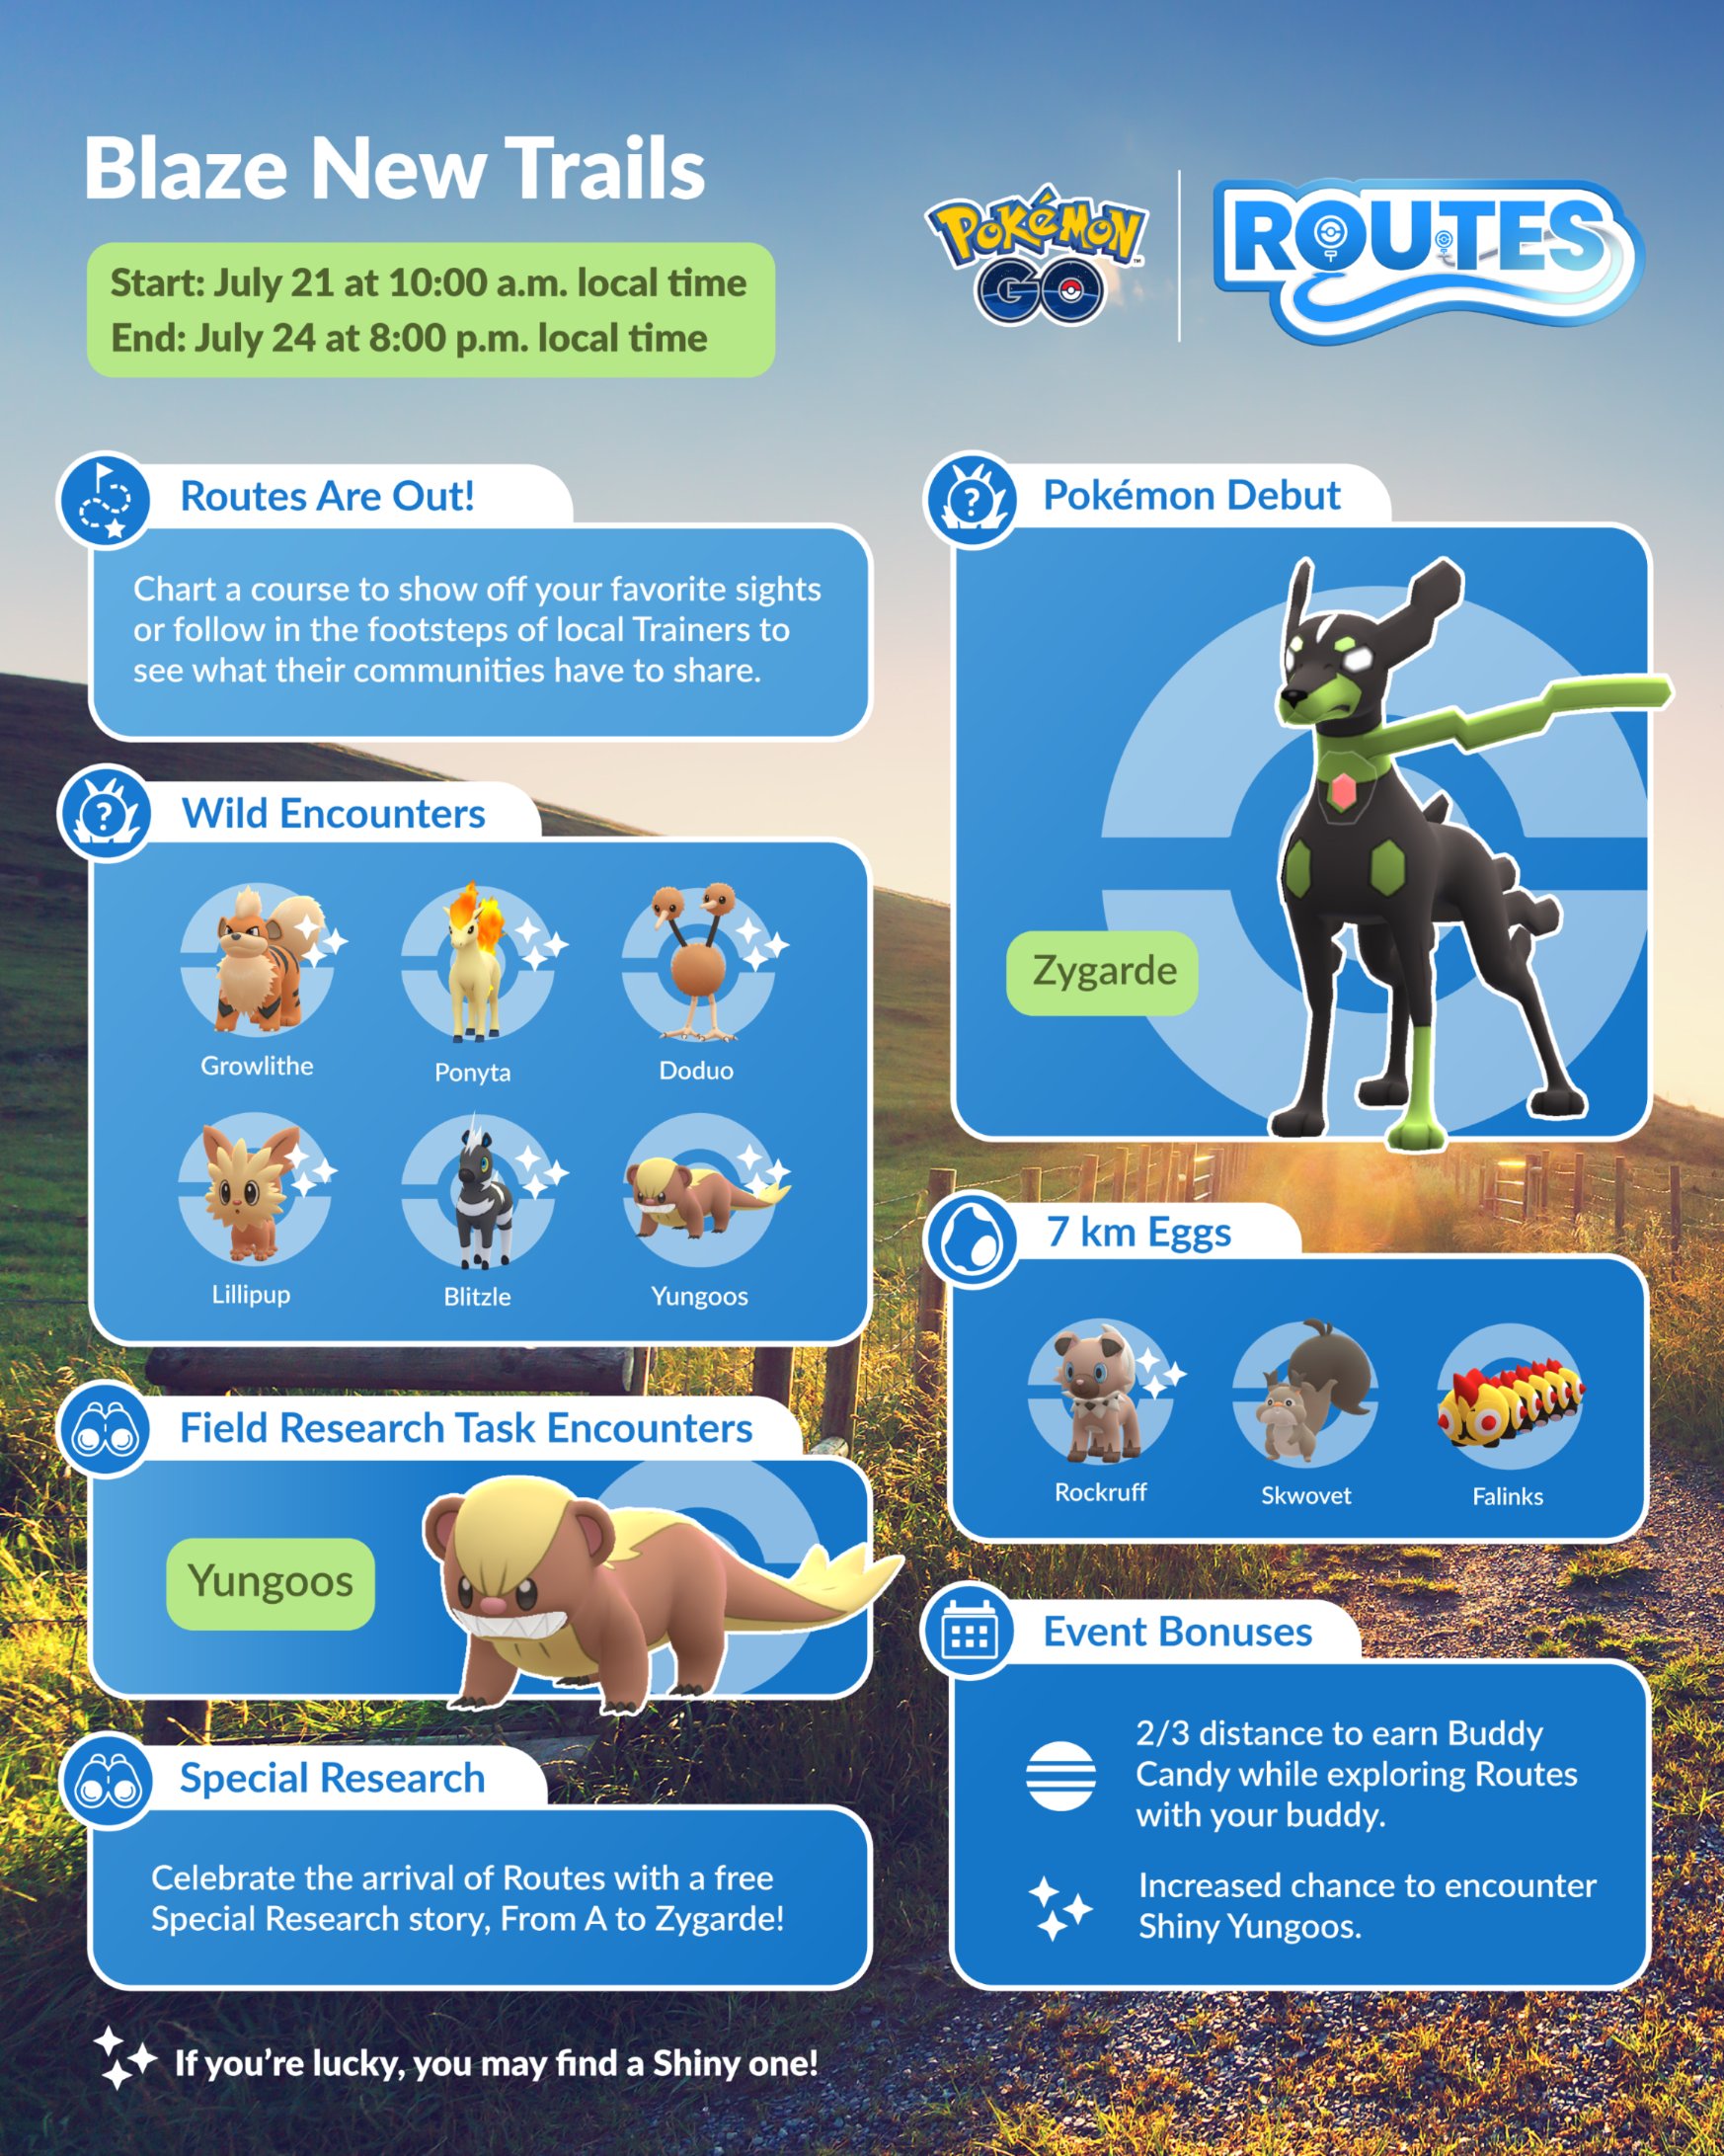 Celebrate the launch of Routes with the Blaze New Trails event